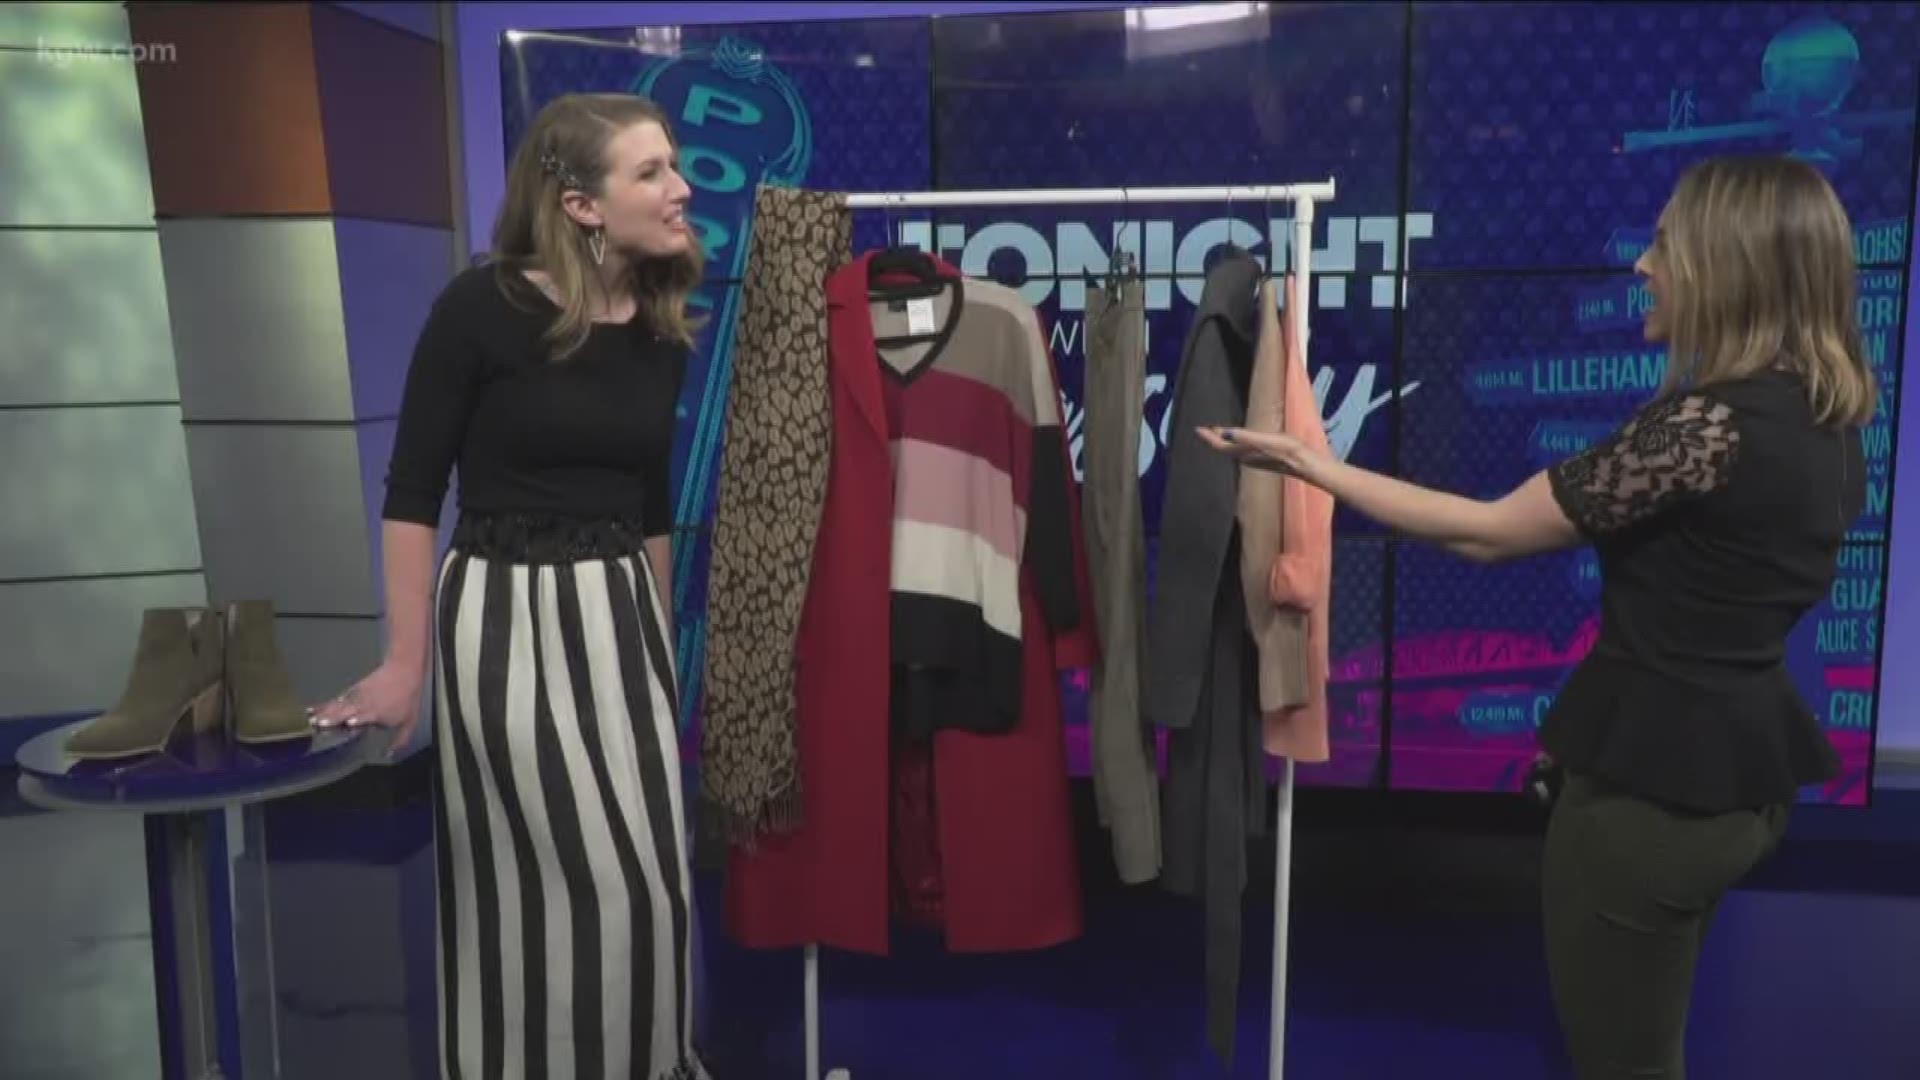 Give your wardrobe a winter makeover on a budget by browsing through local consignment shops.
mystyleclass.com